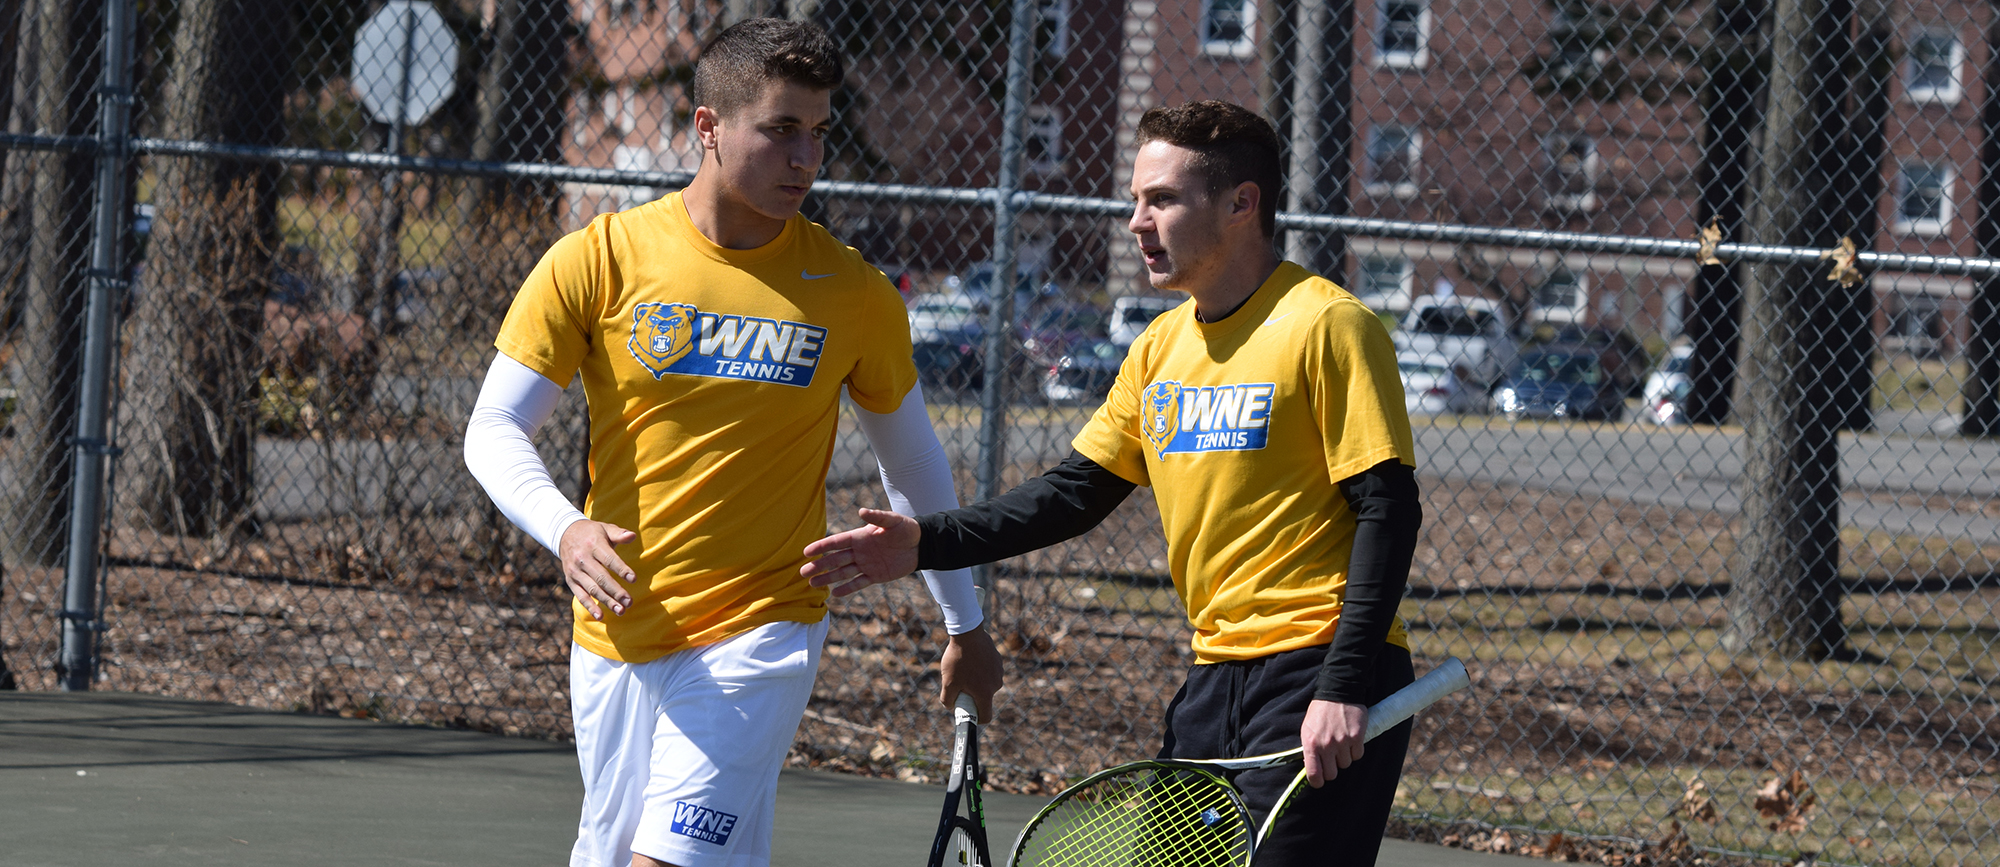 David Kalmer & Justin Kohut won their No. 1 doubles matchup, and also picked up wins in singles play as WNE defeated Roger Williams 7-2 on Saturday. (Photo by Rachael Margossian)